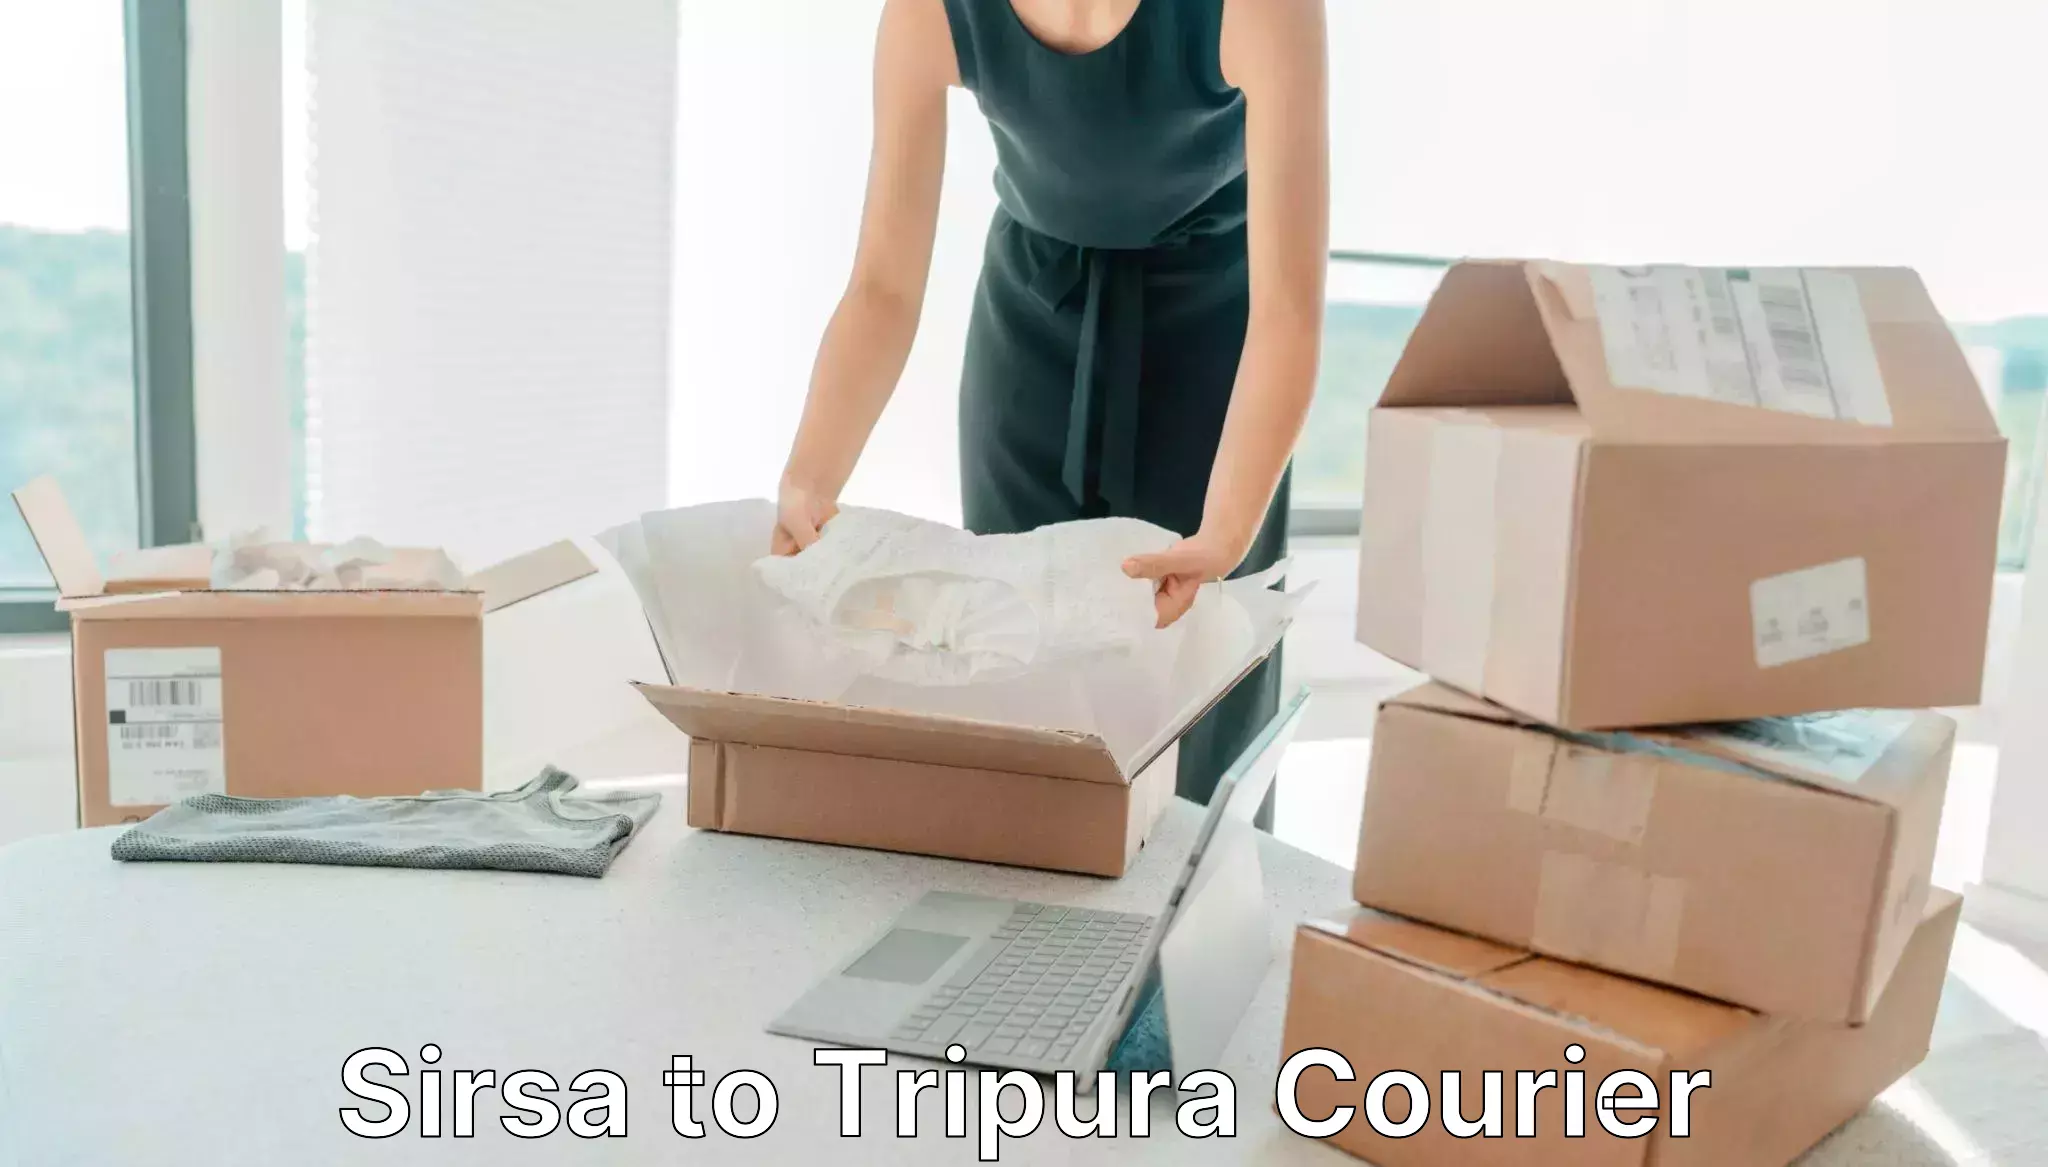 Courier service booking Sirsa to Udaipur Tripura